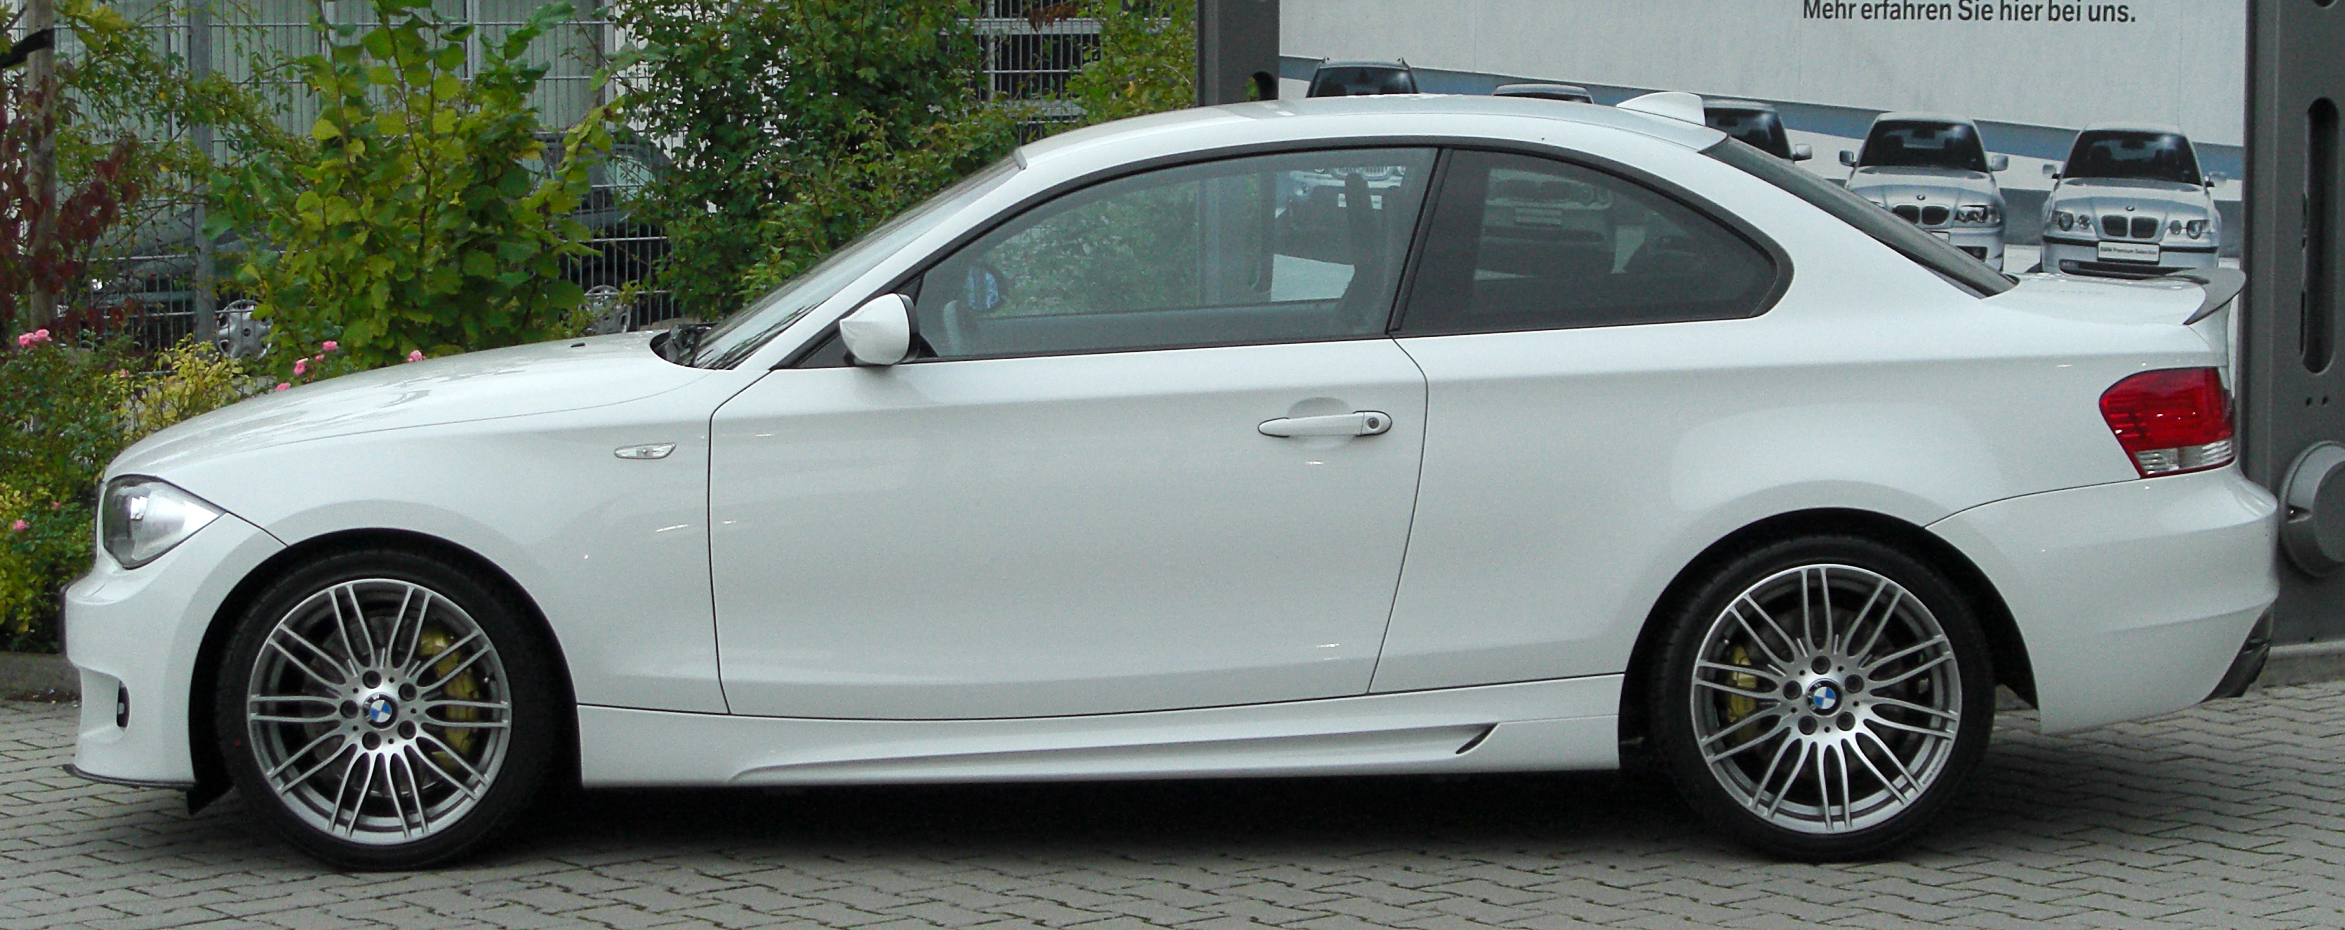 File Bmw 123d Coupe Sportpaket Bmw Performance E Side Jpg Wikimedia Commons